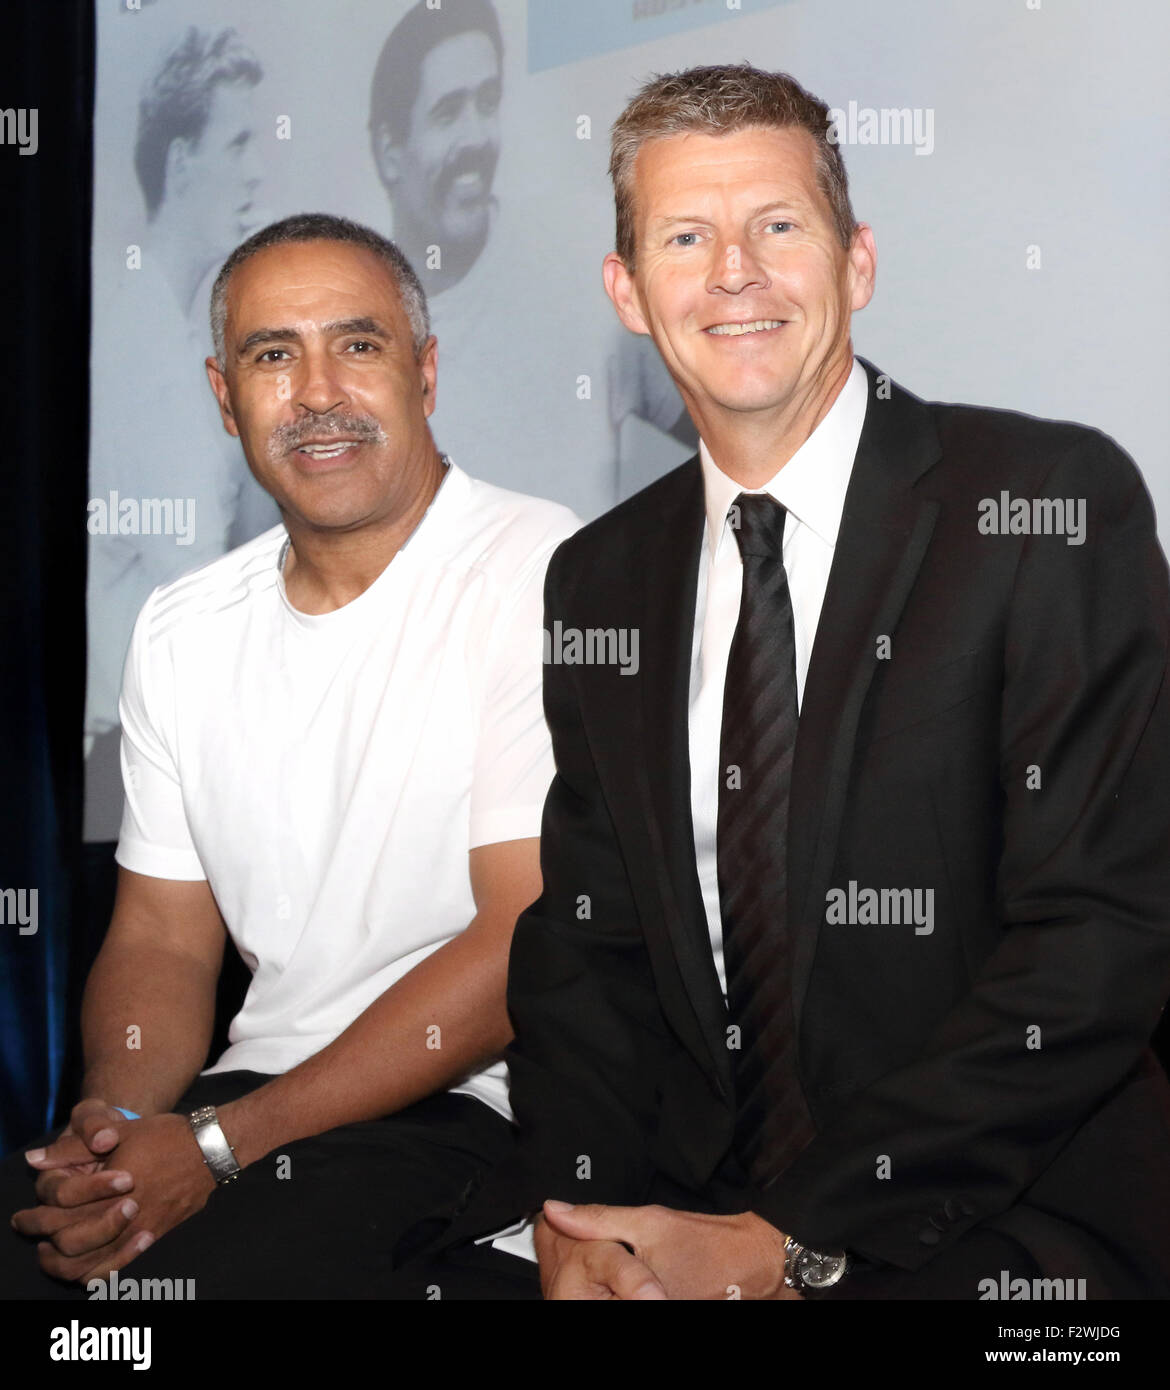 'An Audience With Daley' event in aid of the charity Coco held at the Royal Garden Hotel  Featuring: Daley Thompson, Steve Cram Where: London, United Kingdom When: 23 Jul 2015 Stock Photo